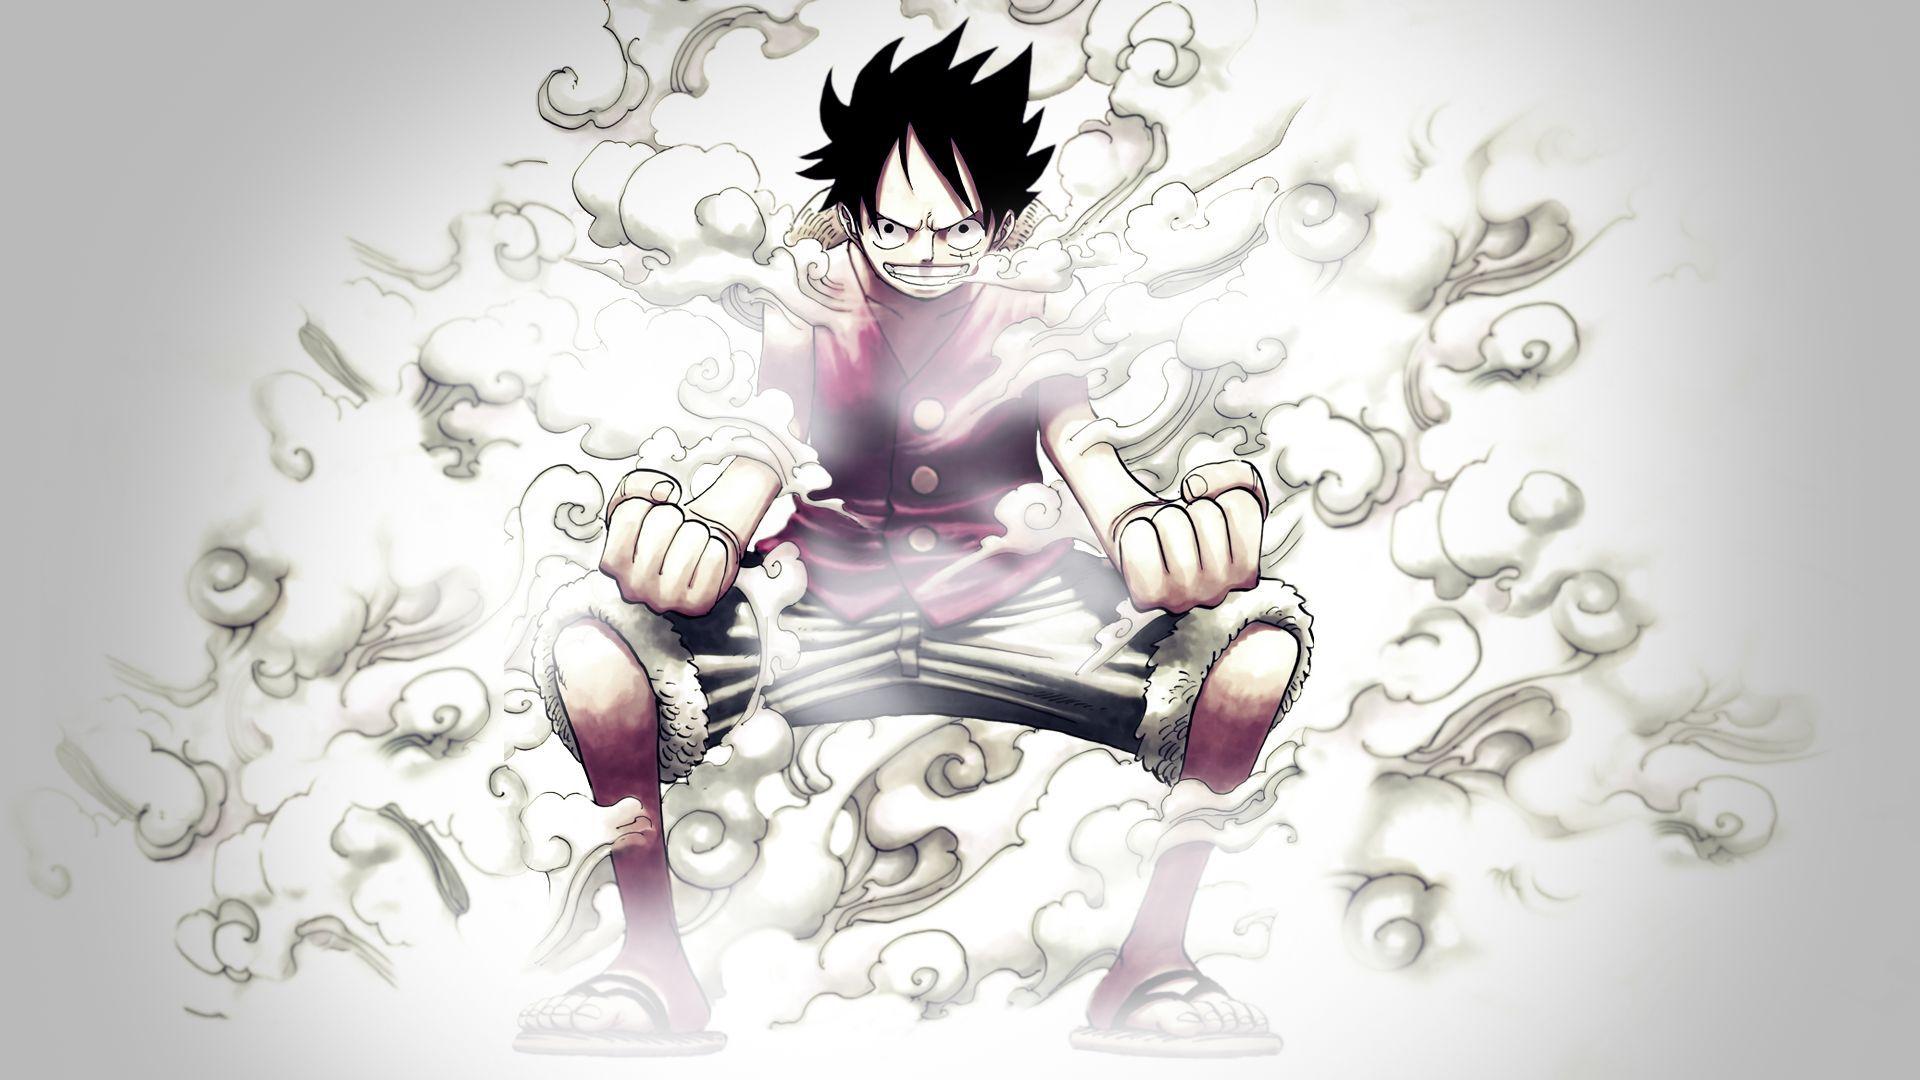 Luffy Gear Second Wallpapers - Top Free Luffy Gear Second Backgrounds